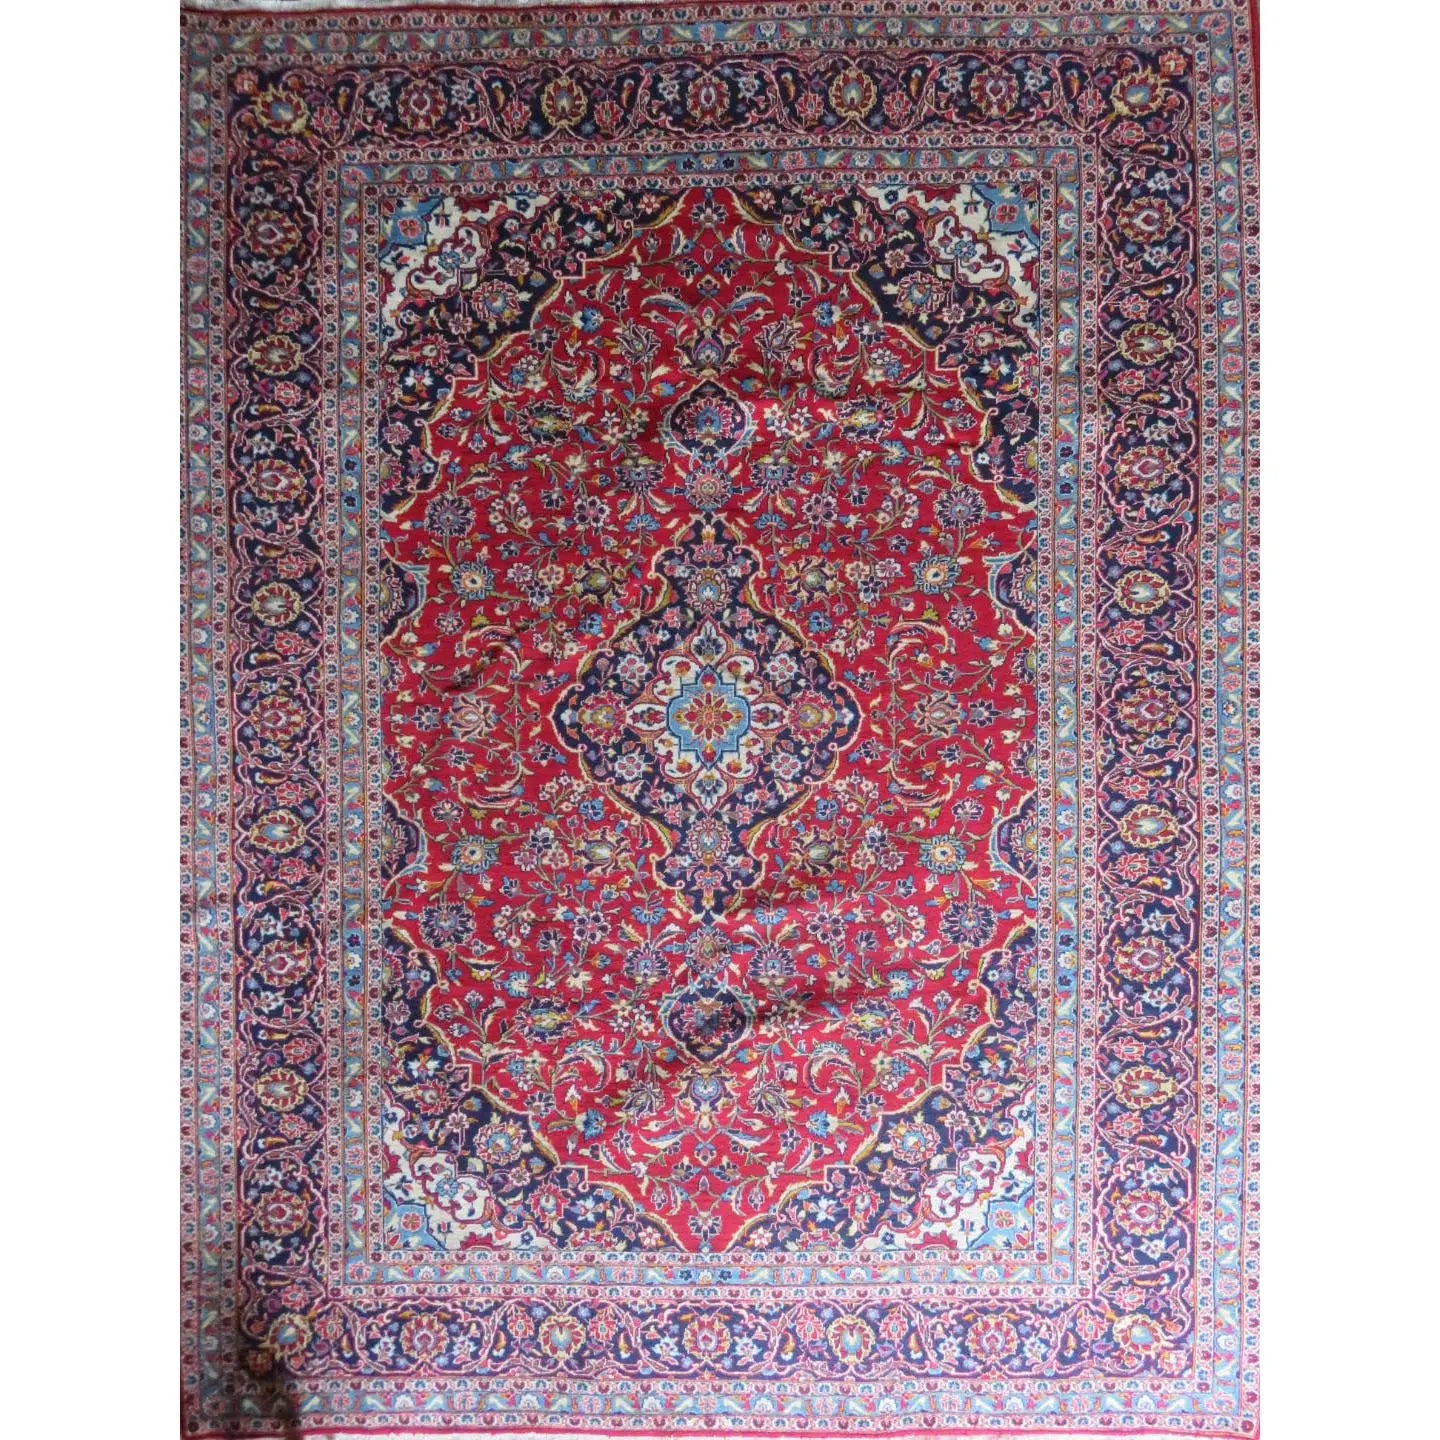 Hand-Knotted Persian Wool Rug _ Luxurious Vintage Design, 12'9" x 10'0", Artisan Crafted